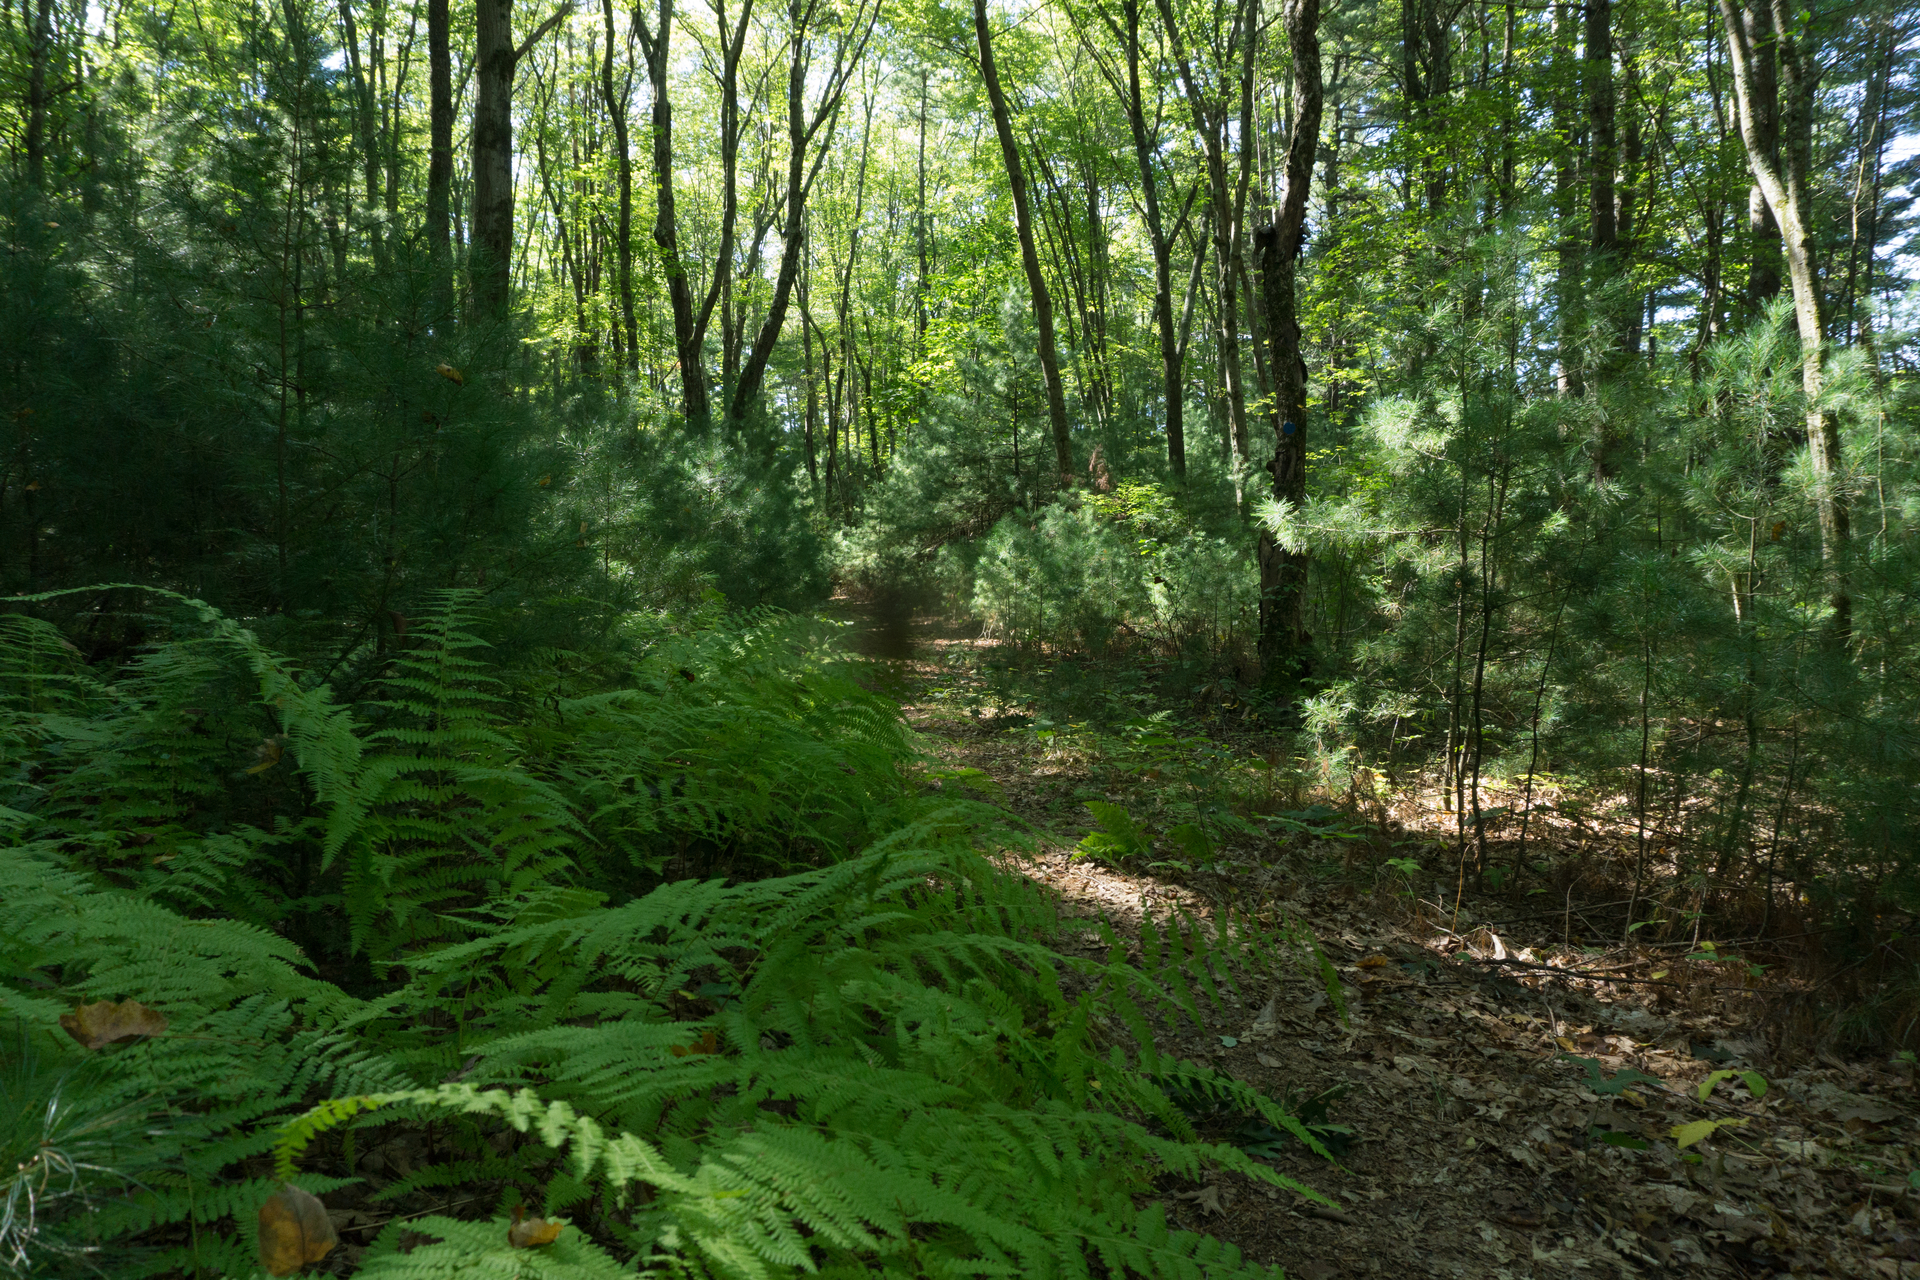 Trail in a dense green forest, ferns covering the first part of the path.